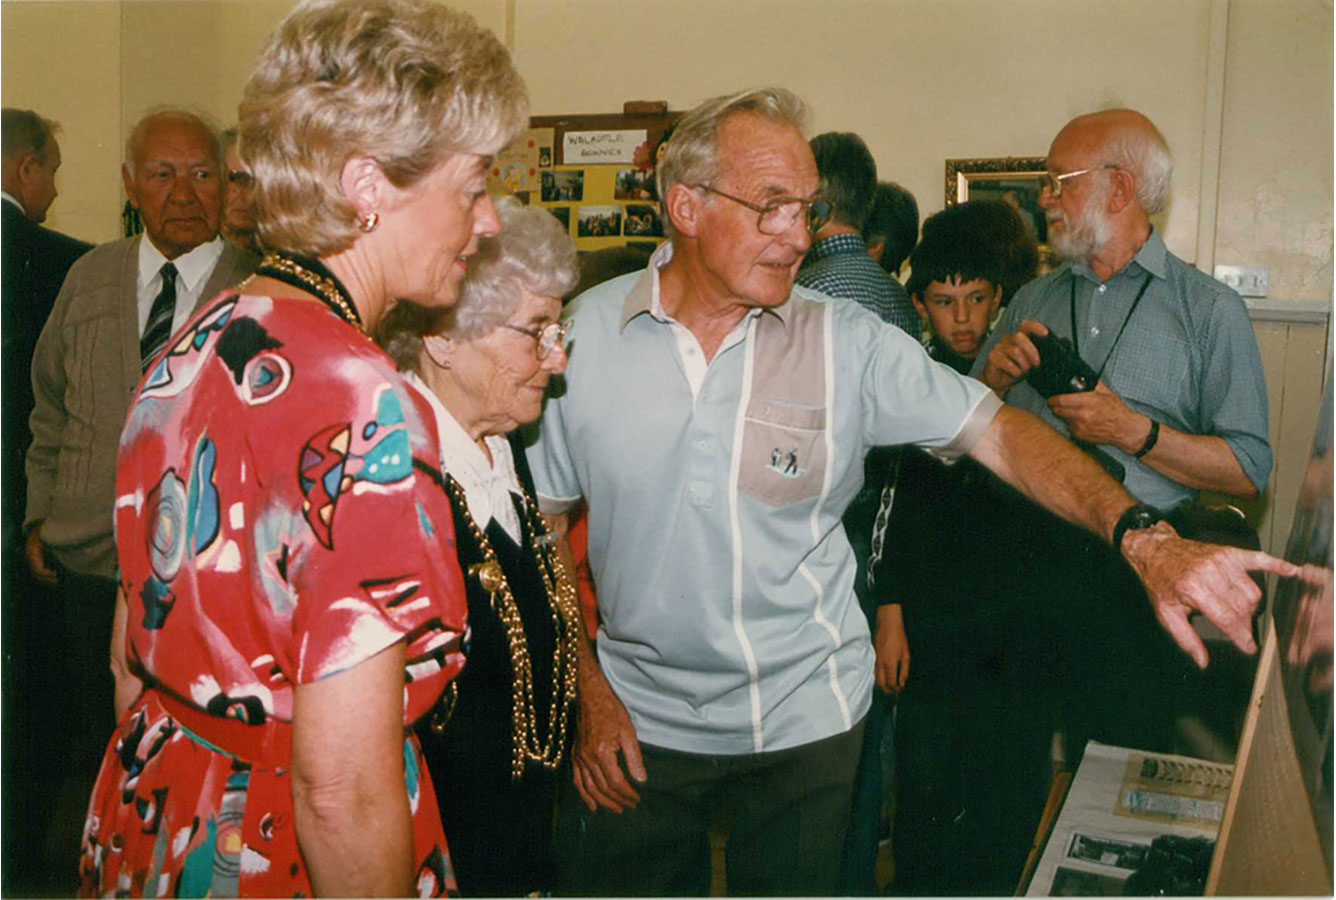 images of the repoening of Walbottle Village Institute in 1997